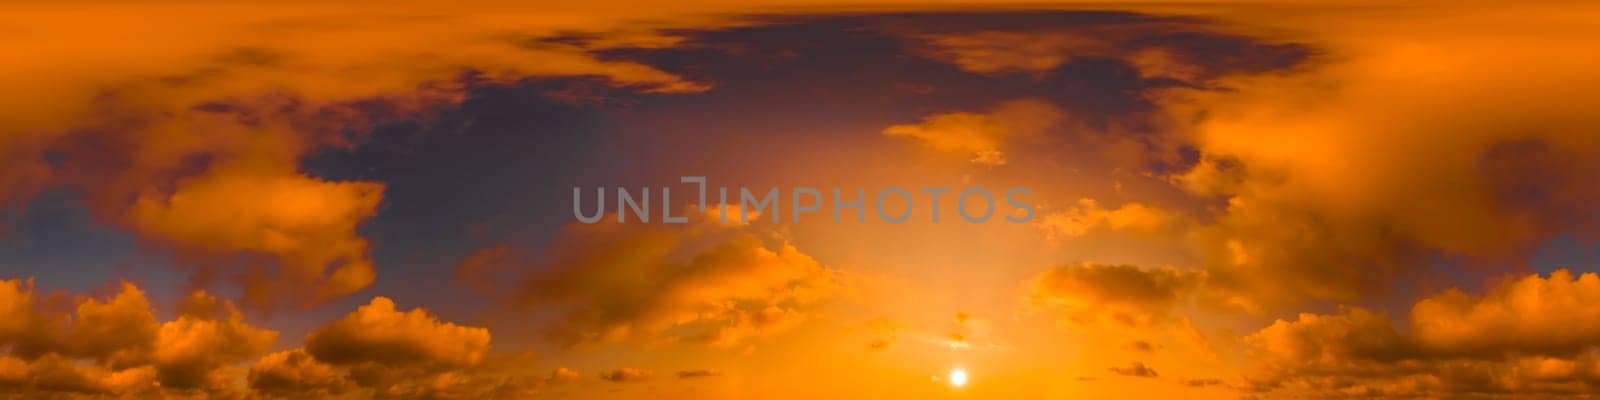 Blue Orange evening sky seamless panorama spherical equirectangular 360 degree view with Cumulus clouds, setting sun. Climate and weather change. by Matiunina